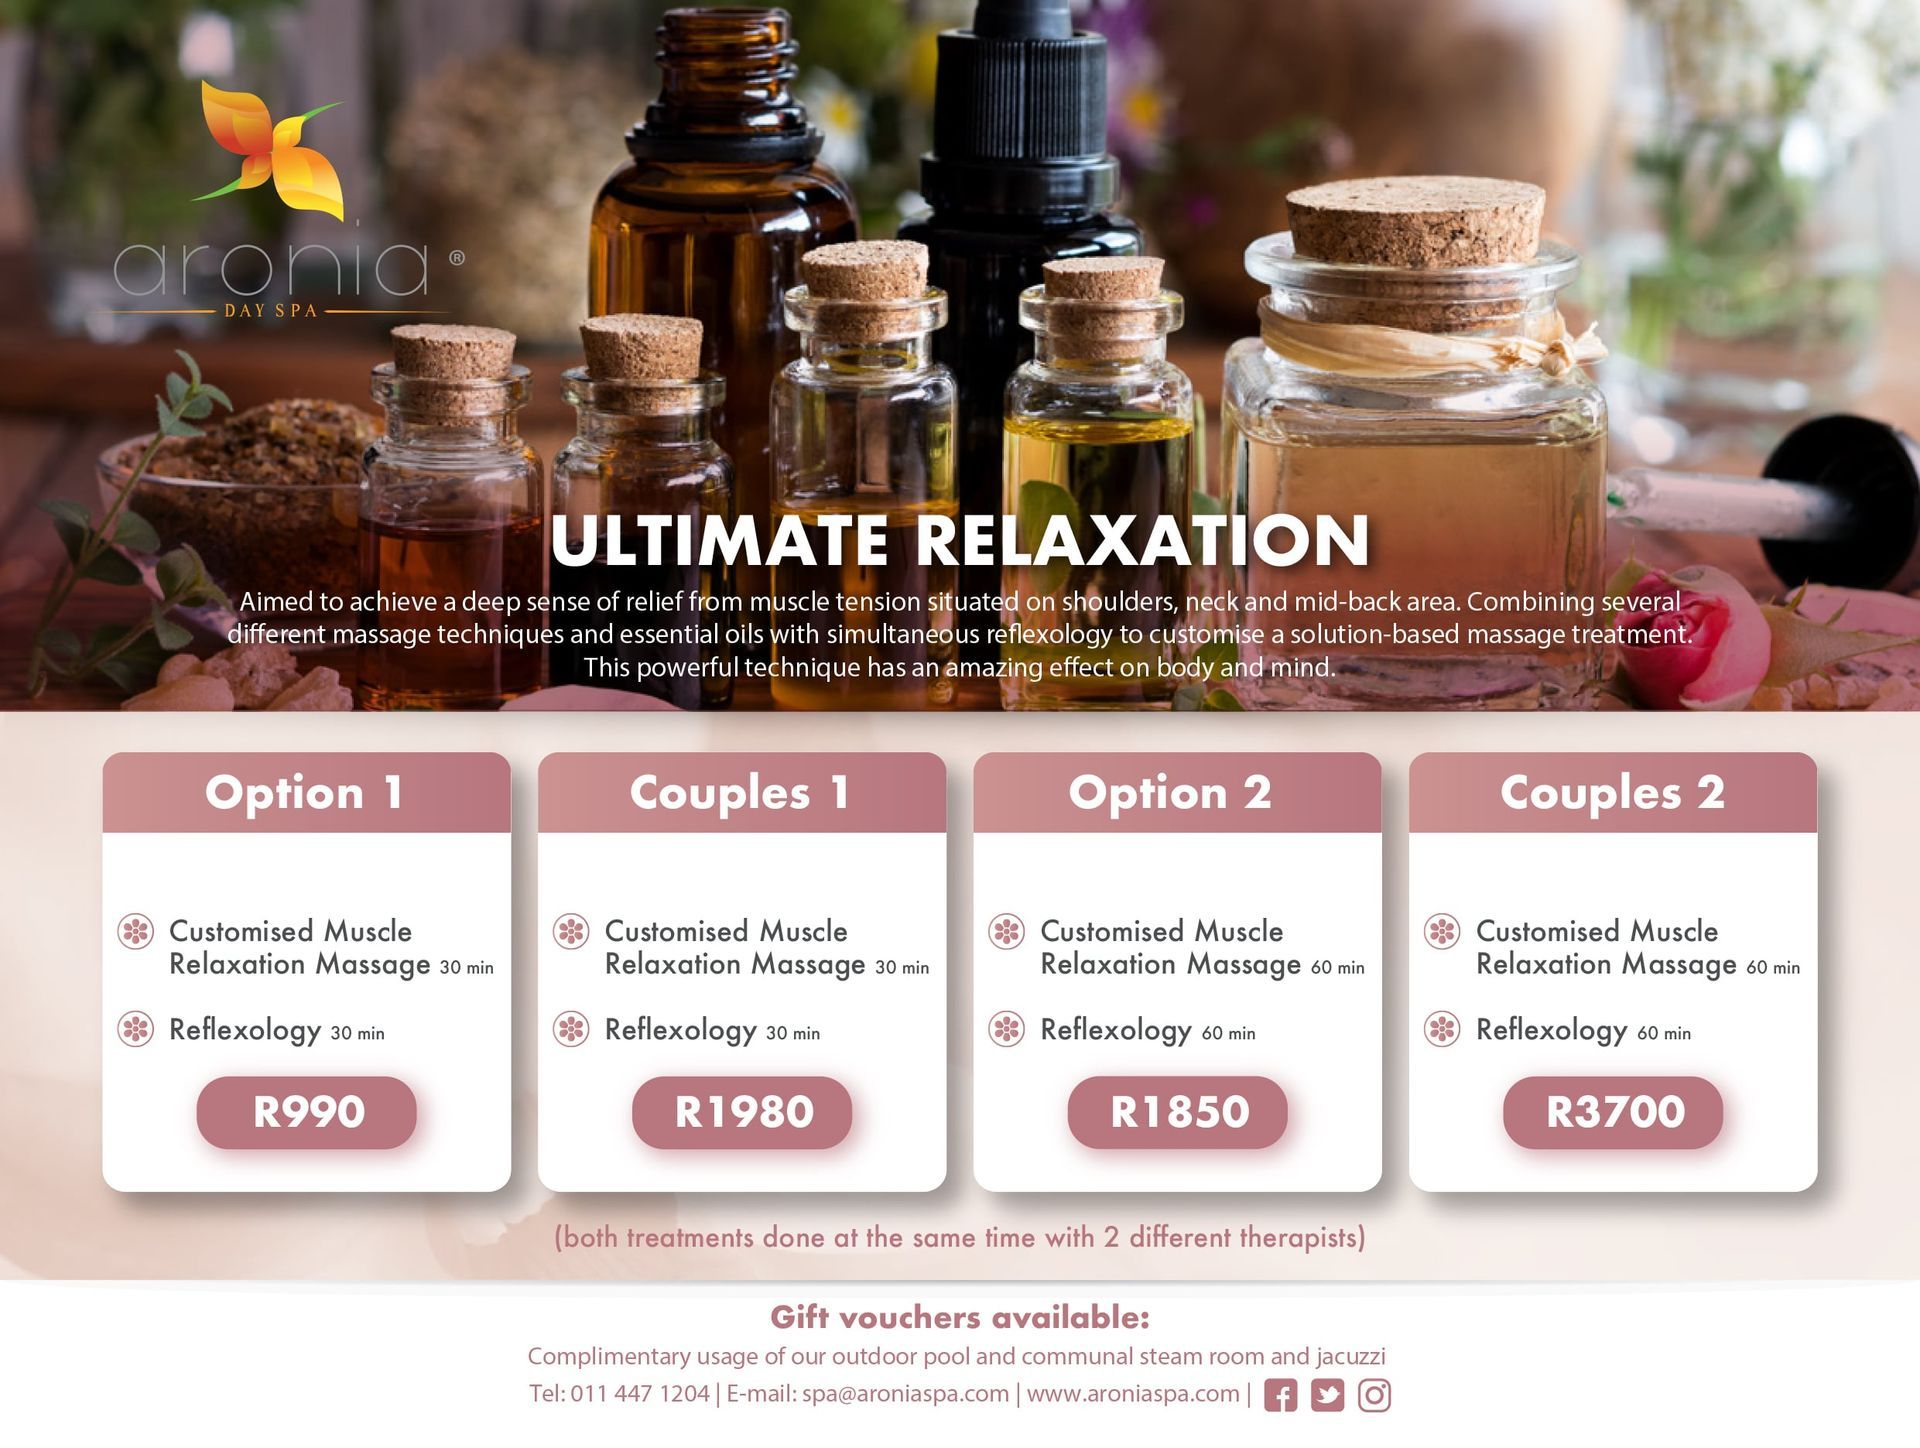 aronia spa packages johannesburg